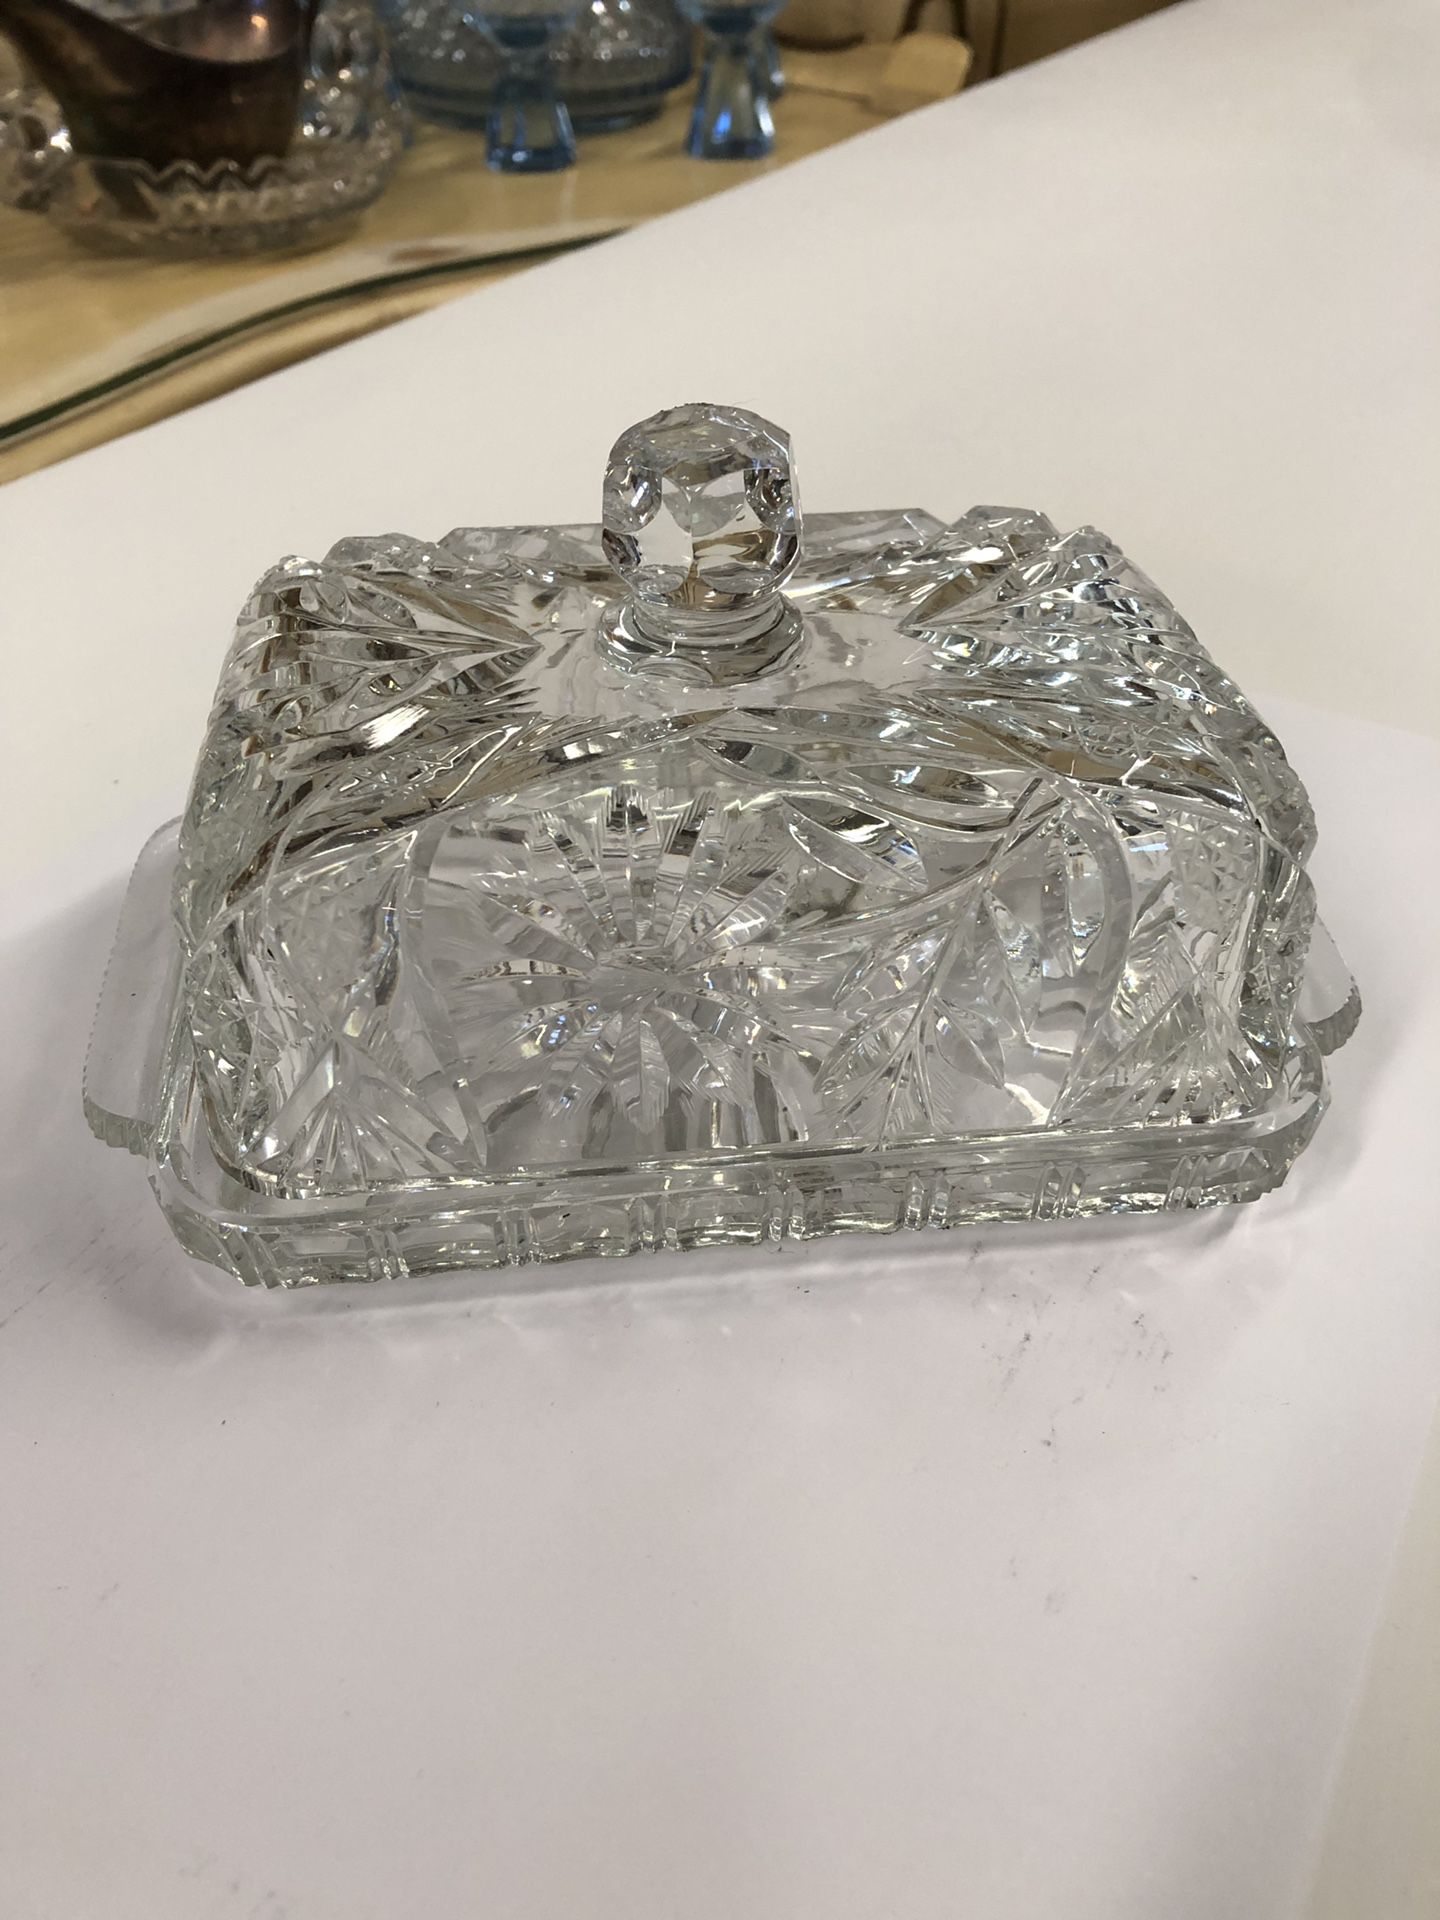 Butter dish vintage crystal covered butter dish… Holiday Christmas entertaining